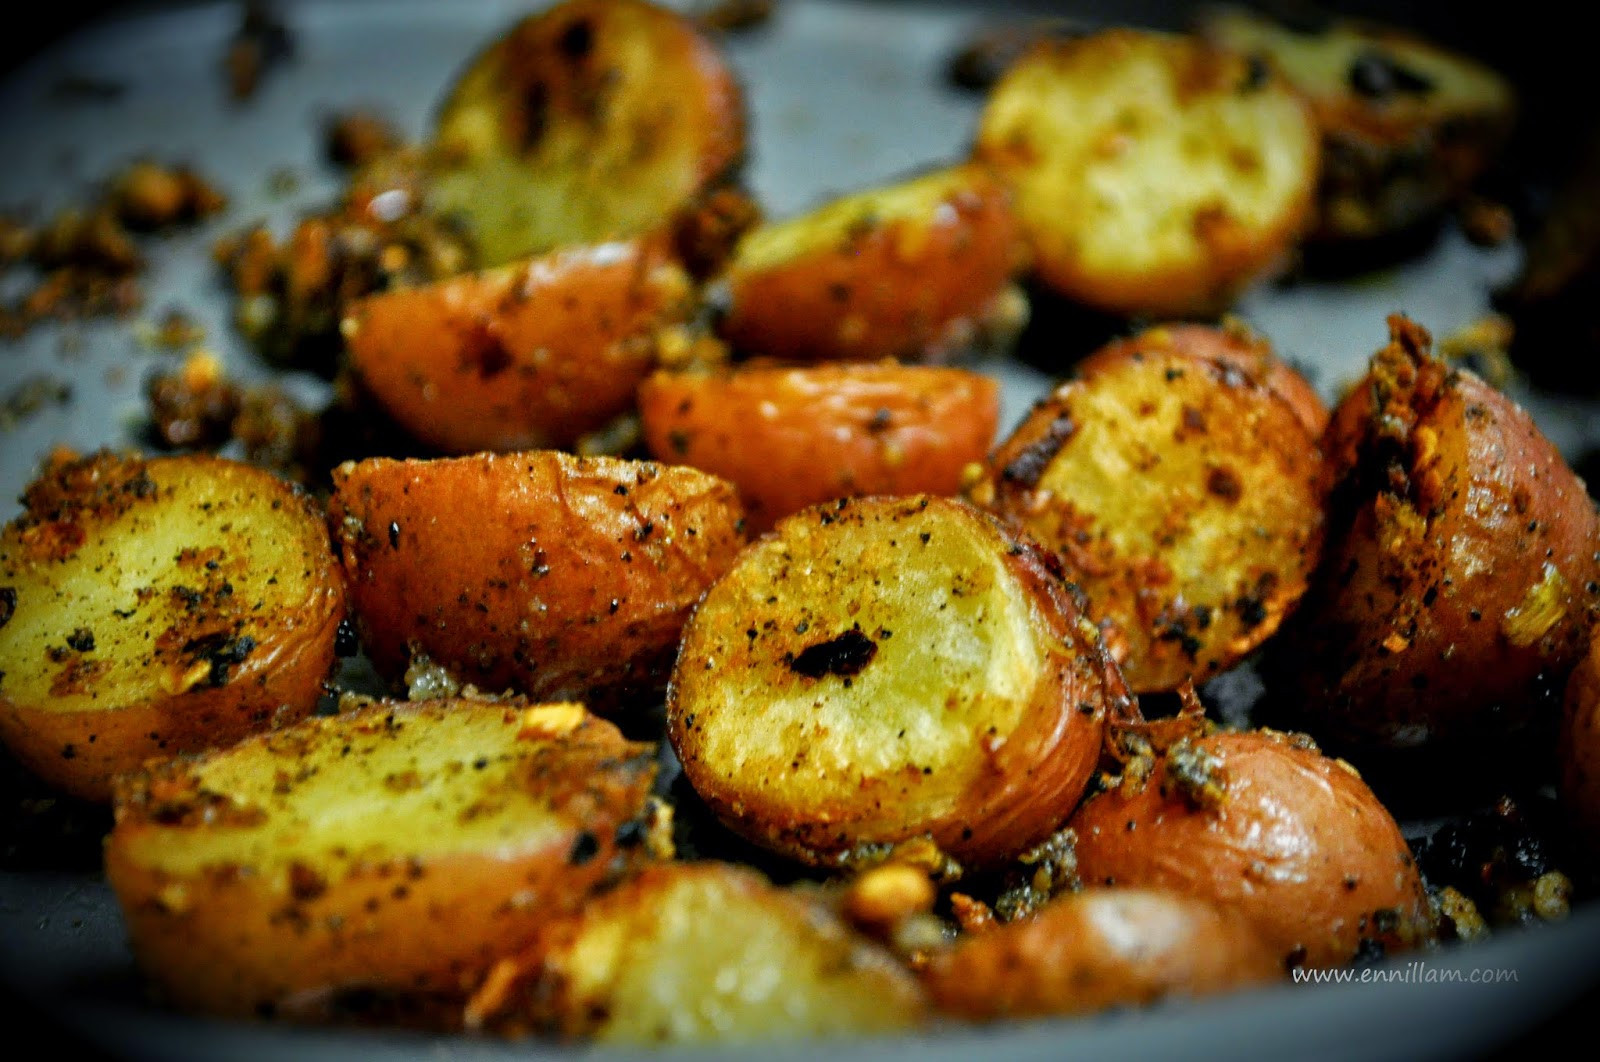 Oven Roasted Baby Red Potatoes
 Oven roasted red baby potatoes